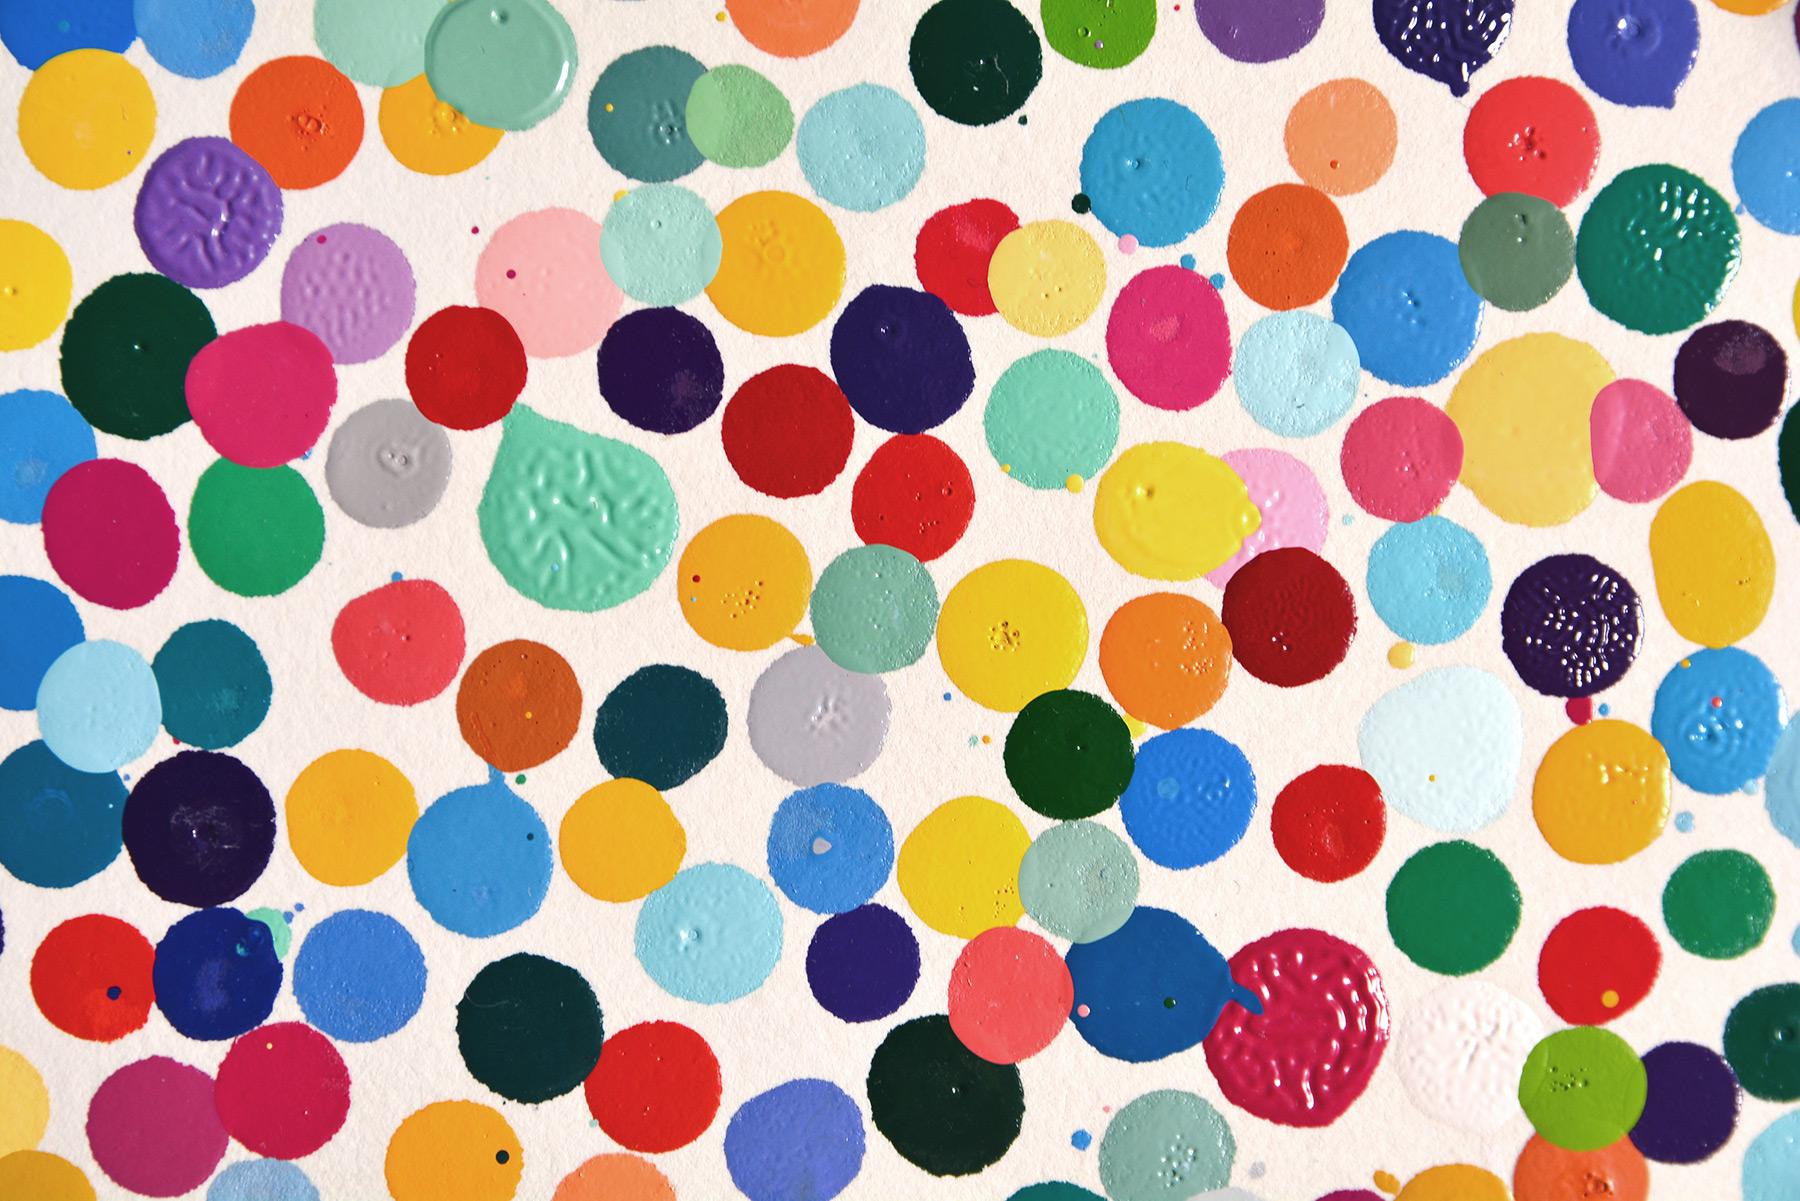 DAMIEN HIRST - THE CURRENCY. Original work The Currency Project. Dots. Colors 2